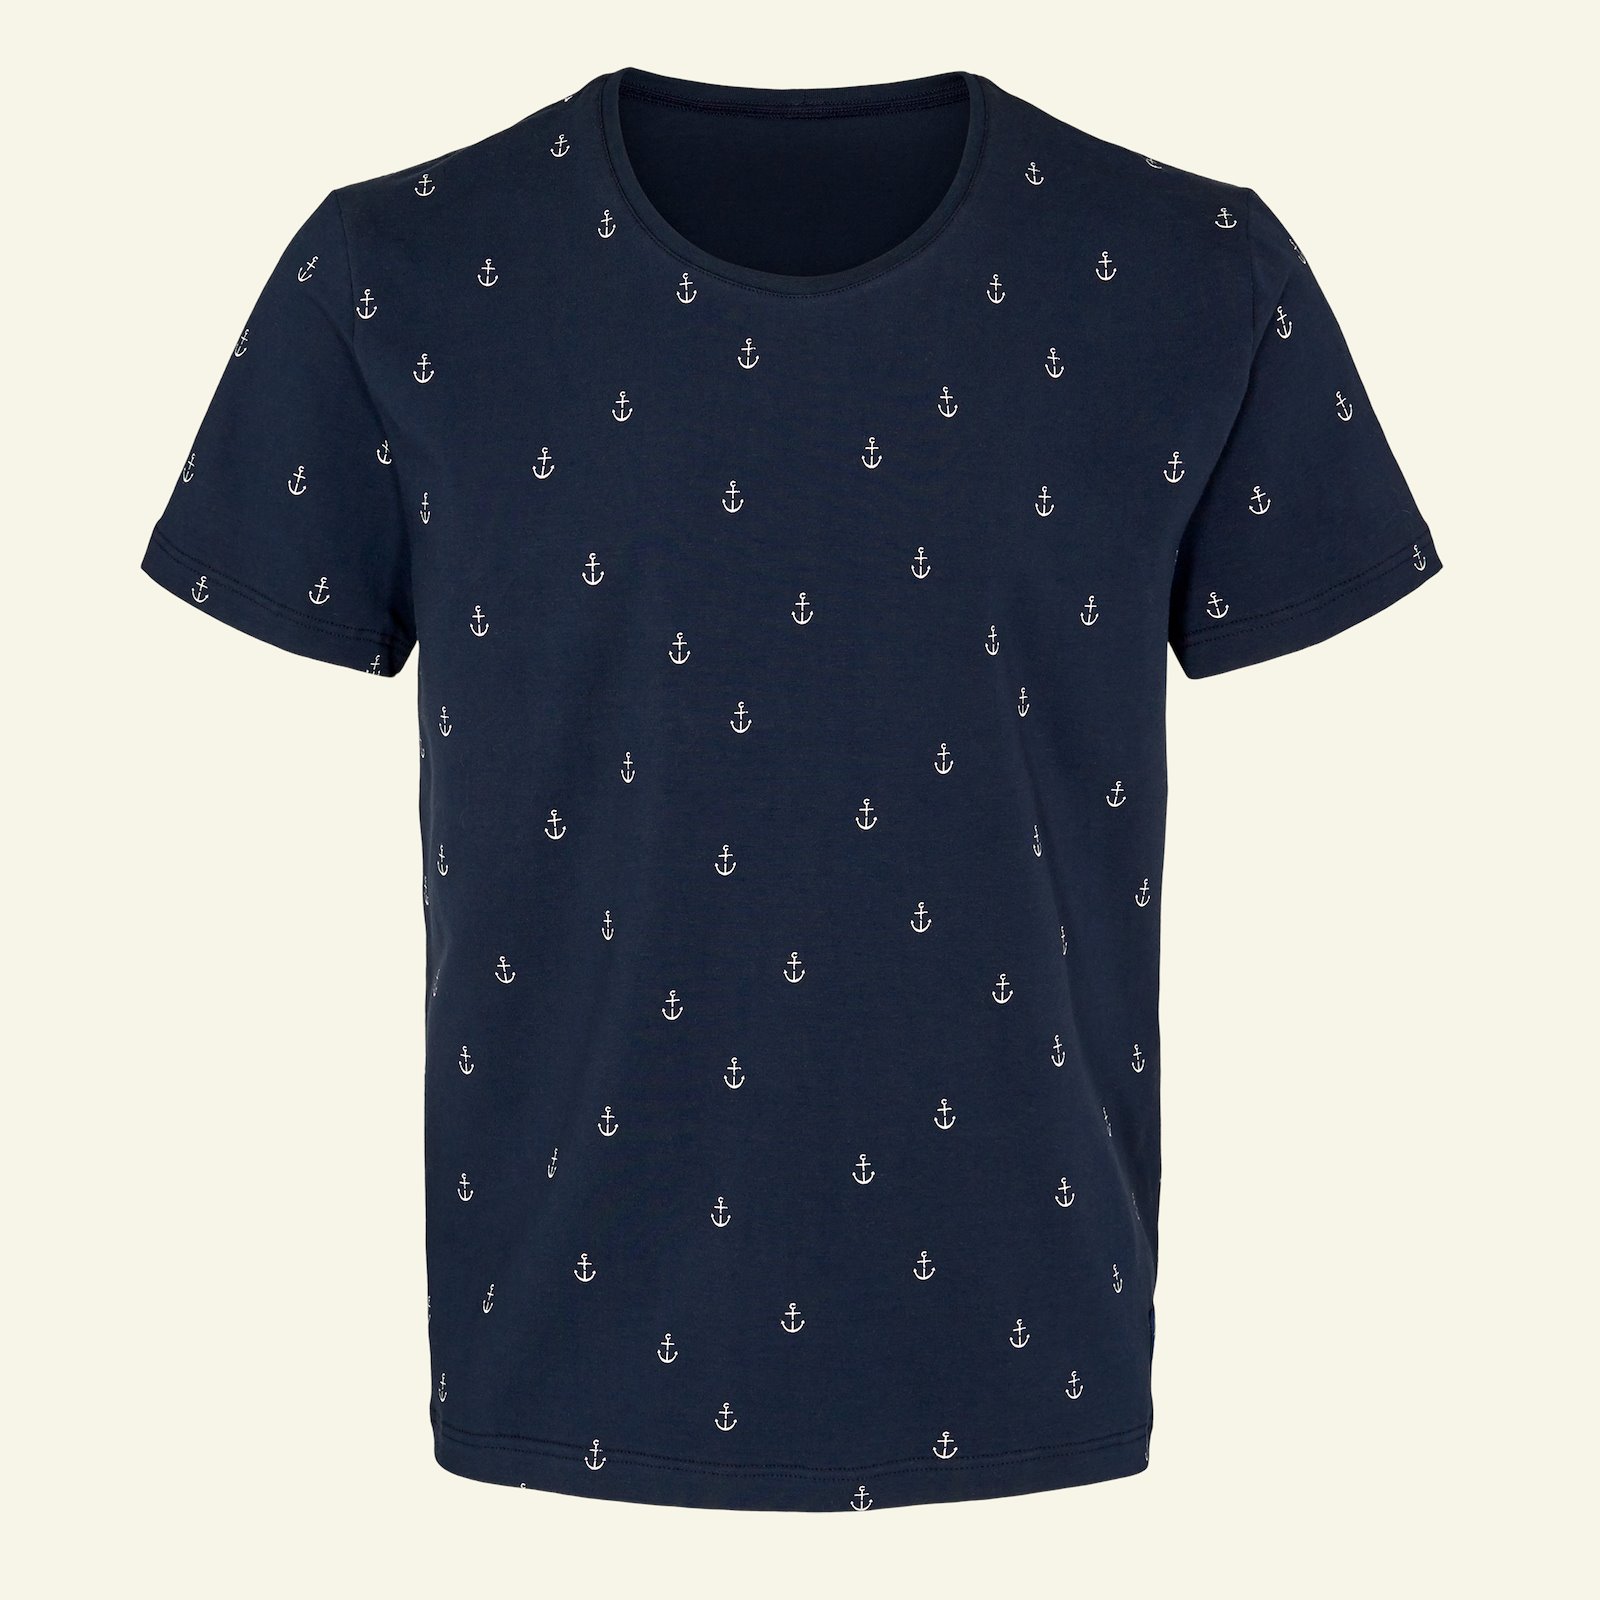 Organic stretch jersey navy with anchors p86000_272697_sskit